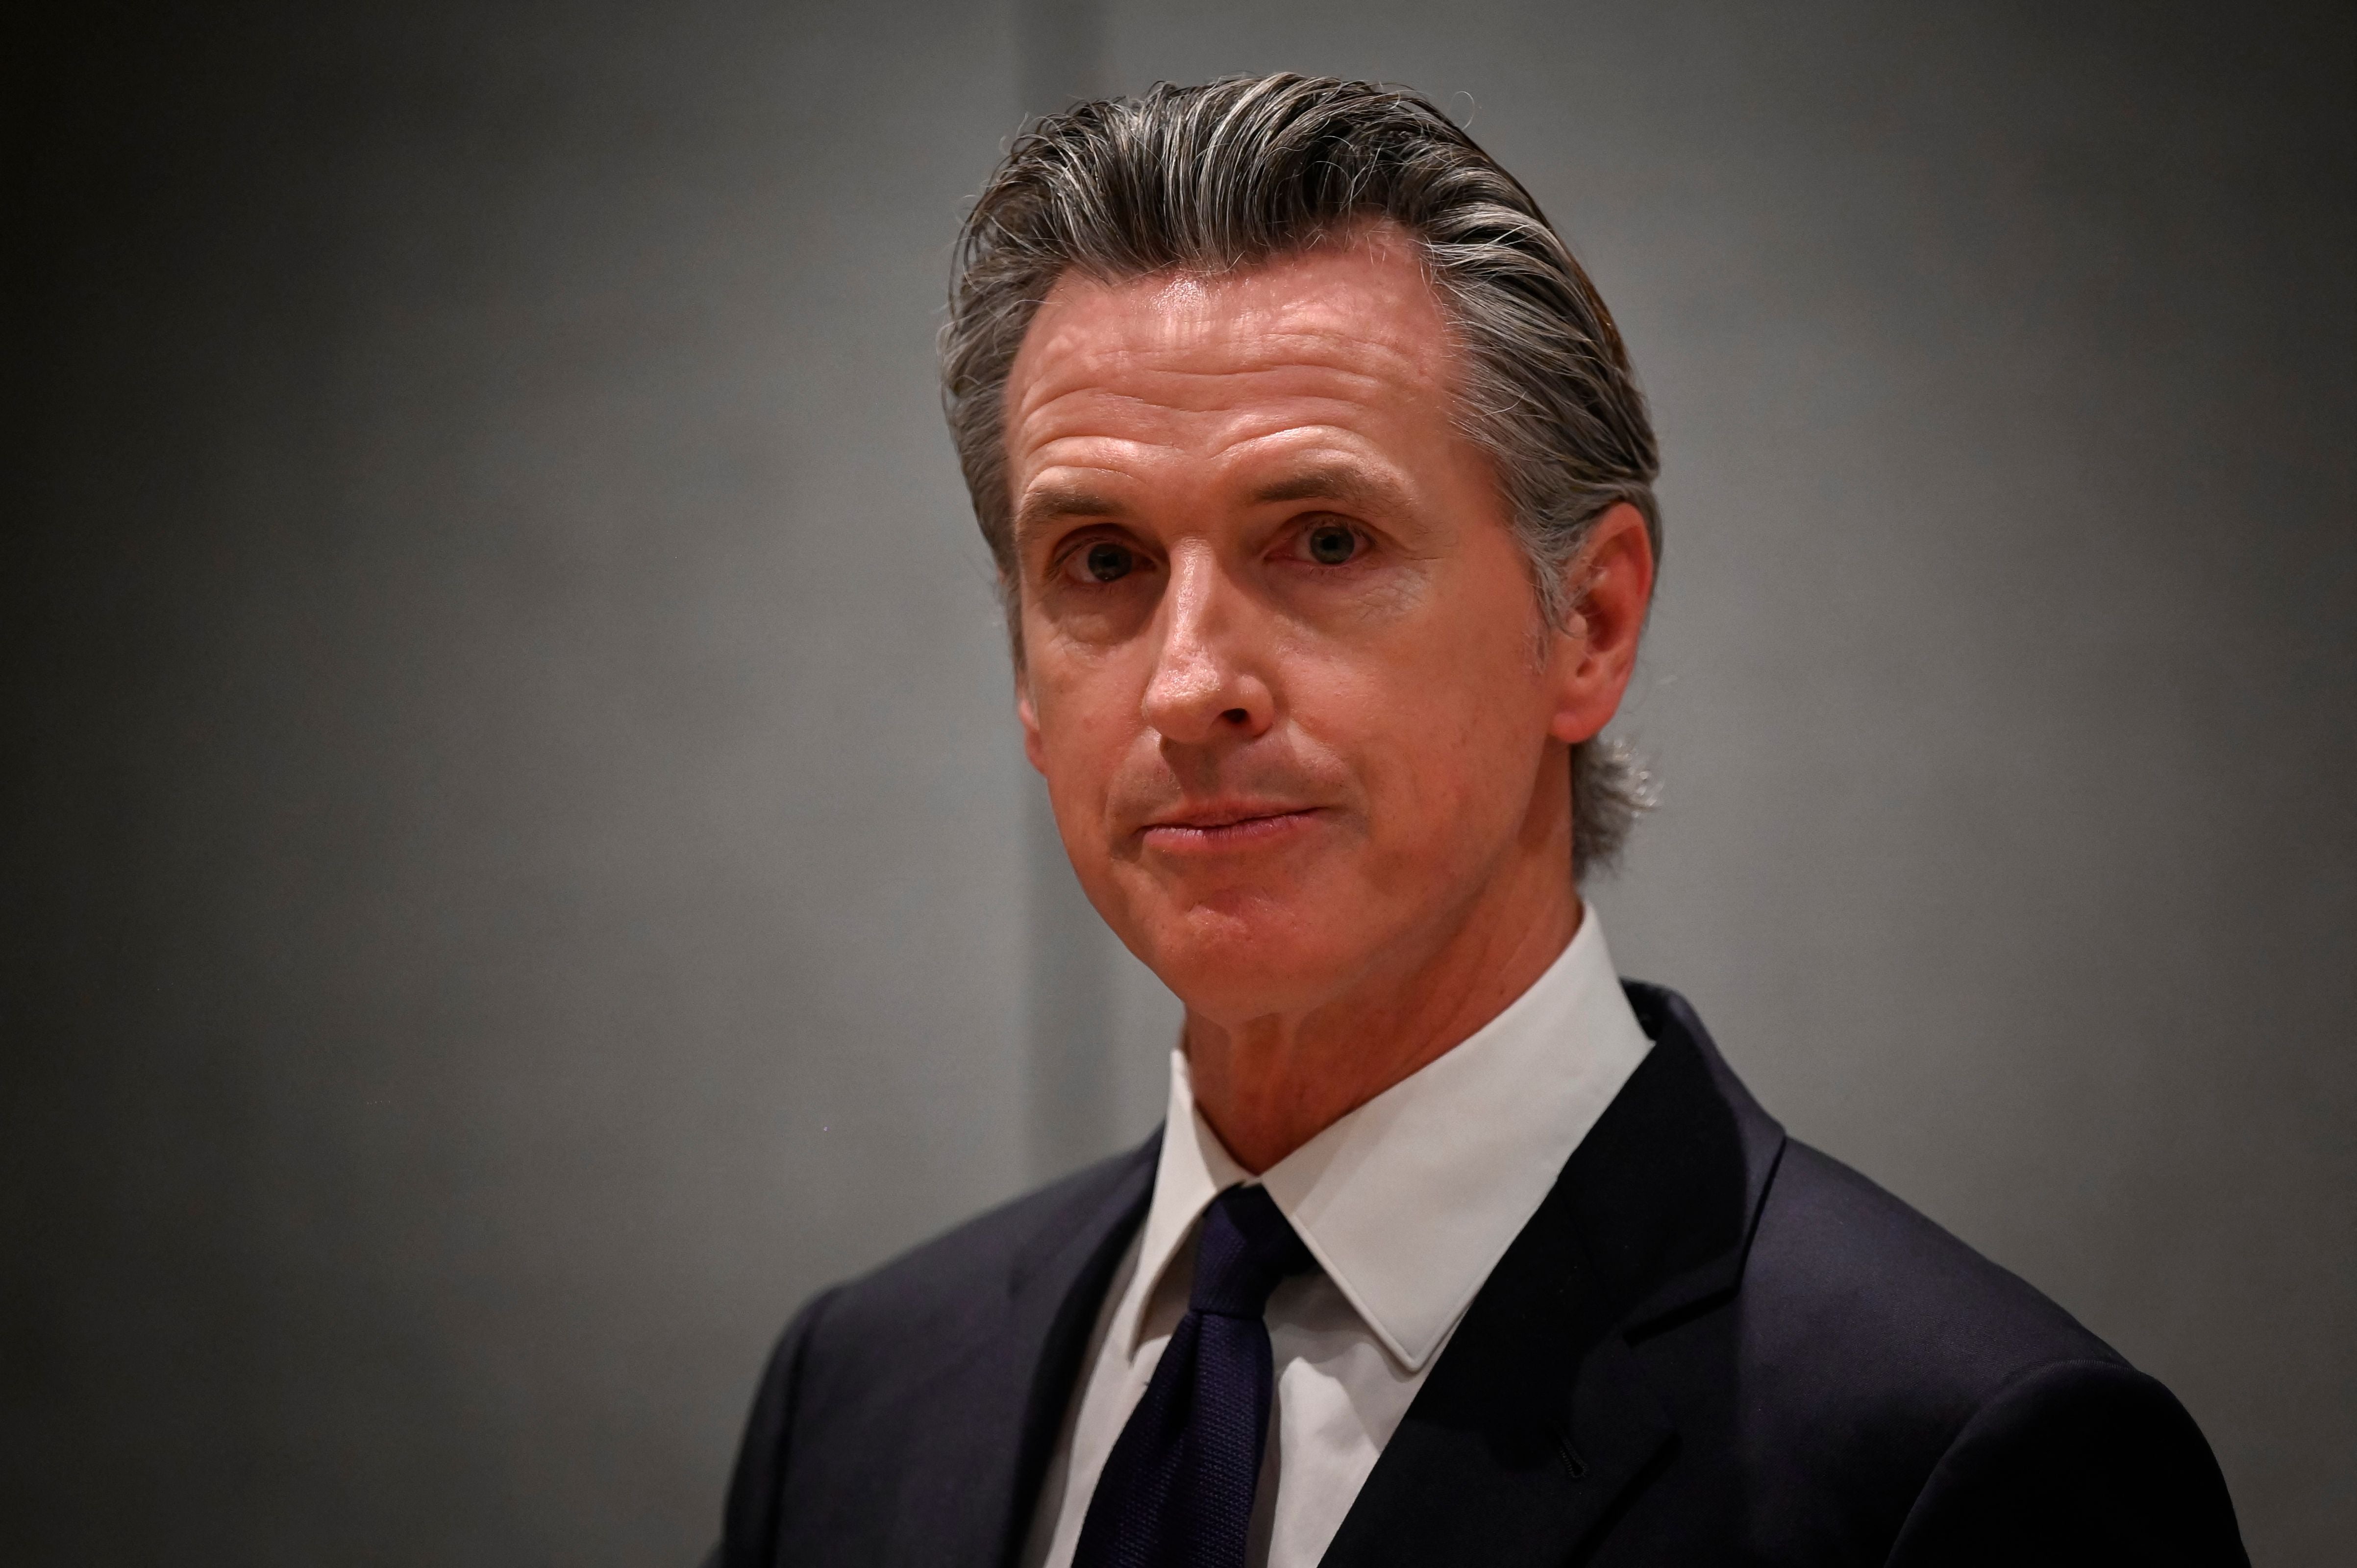 Gavin Newsom was called out in Trump’s speech while on the topic of migrants crossing the border